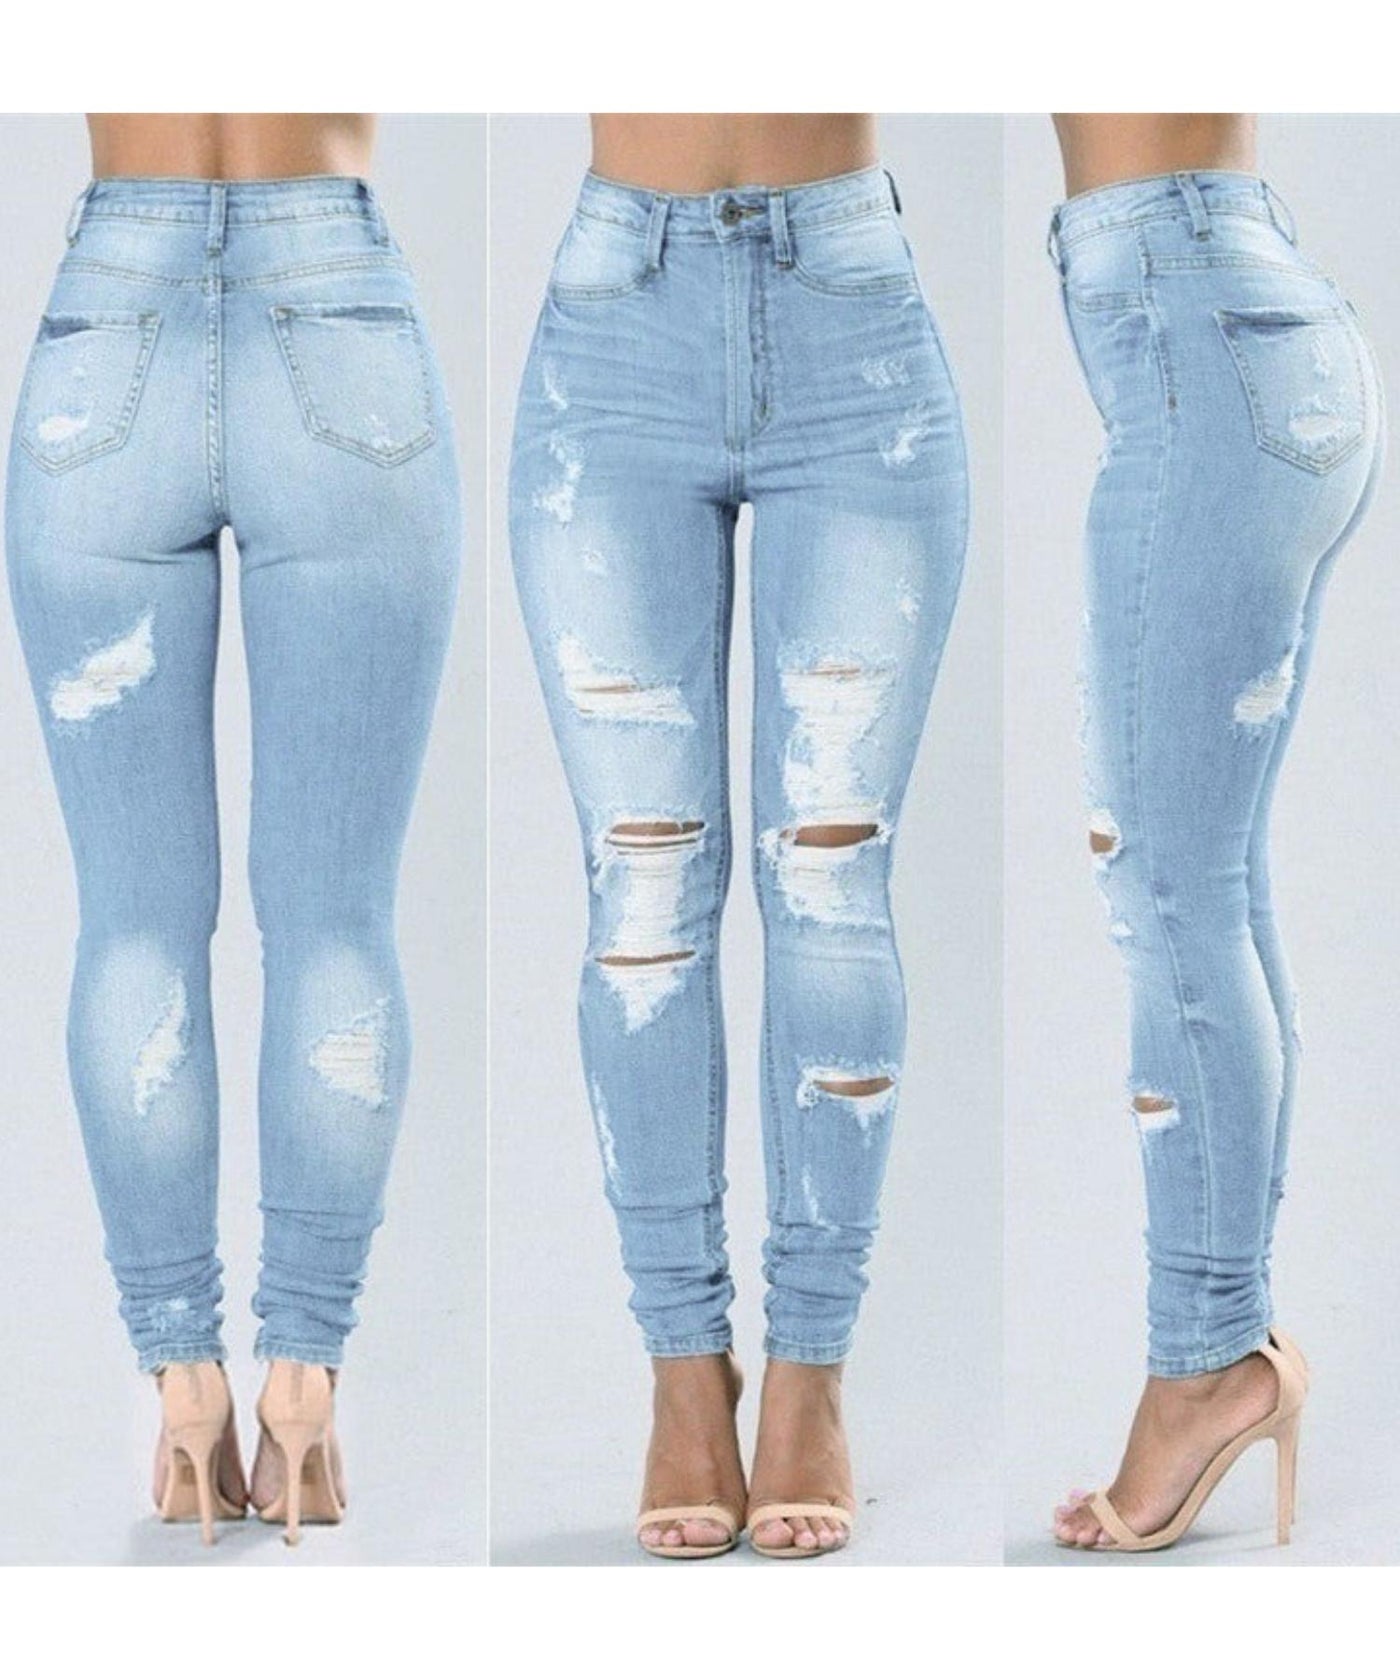 NTG Fad RIPPED TRENDY STRETCH JEANS